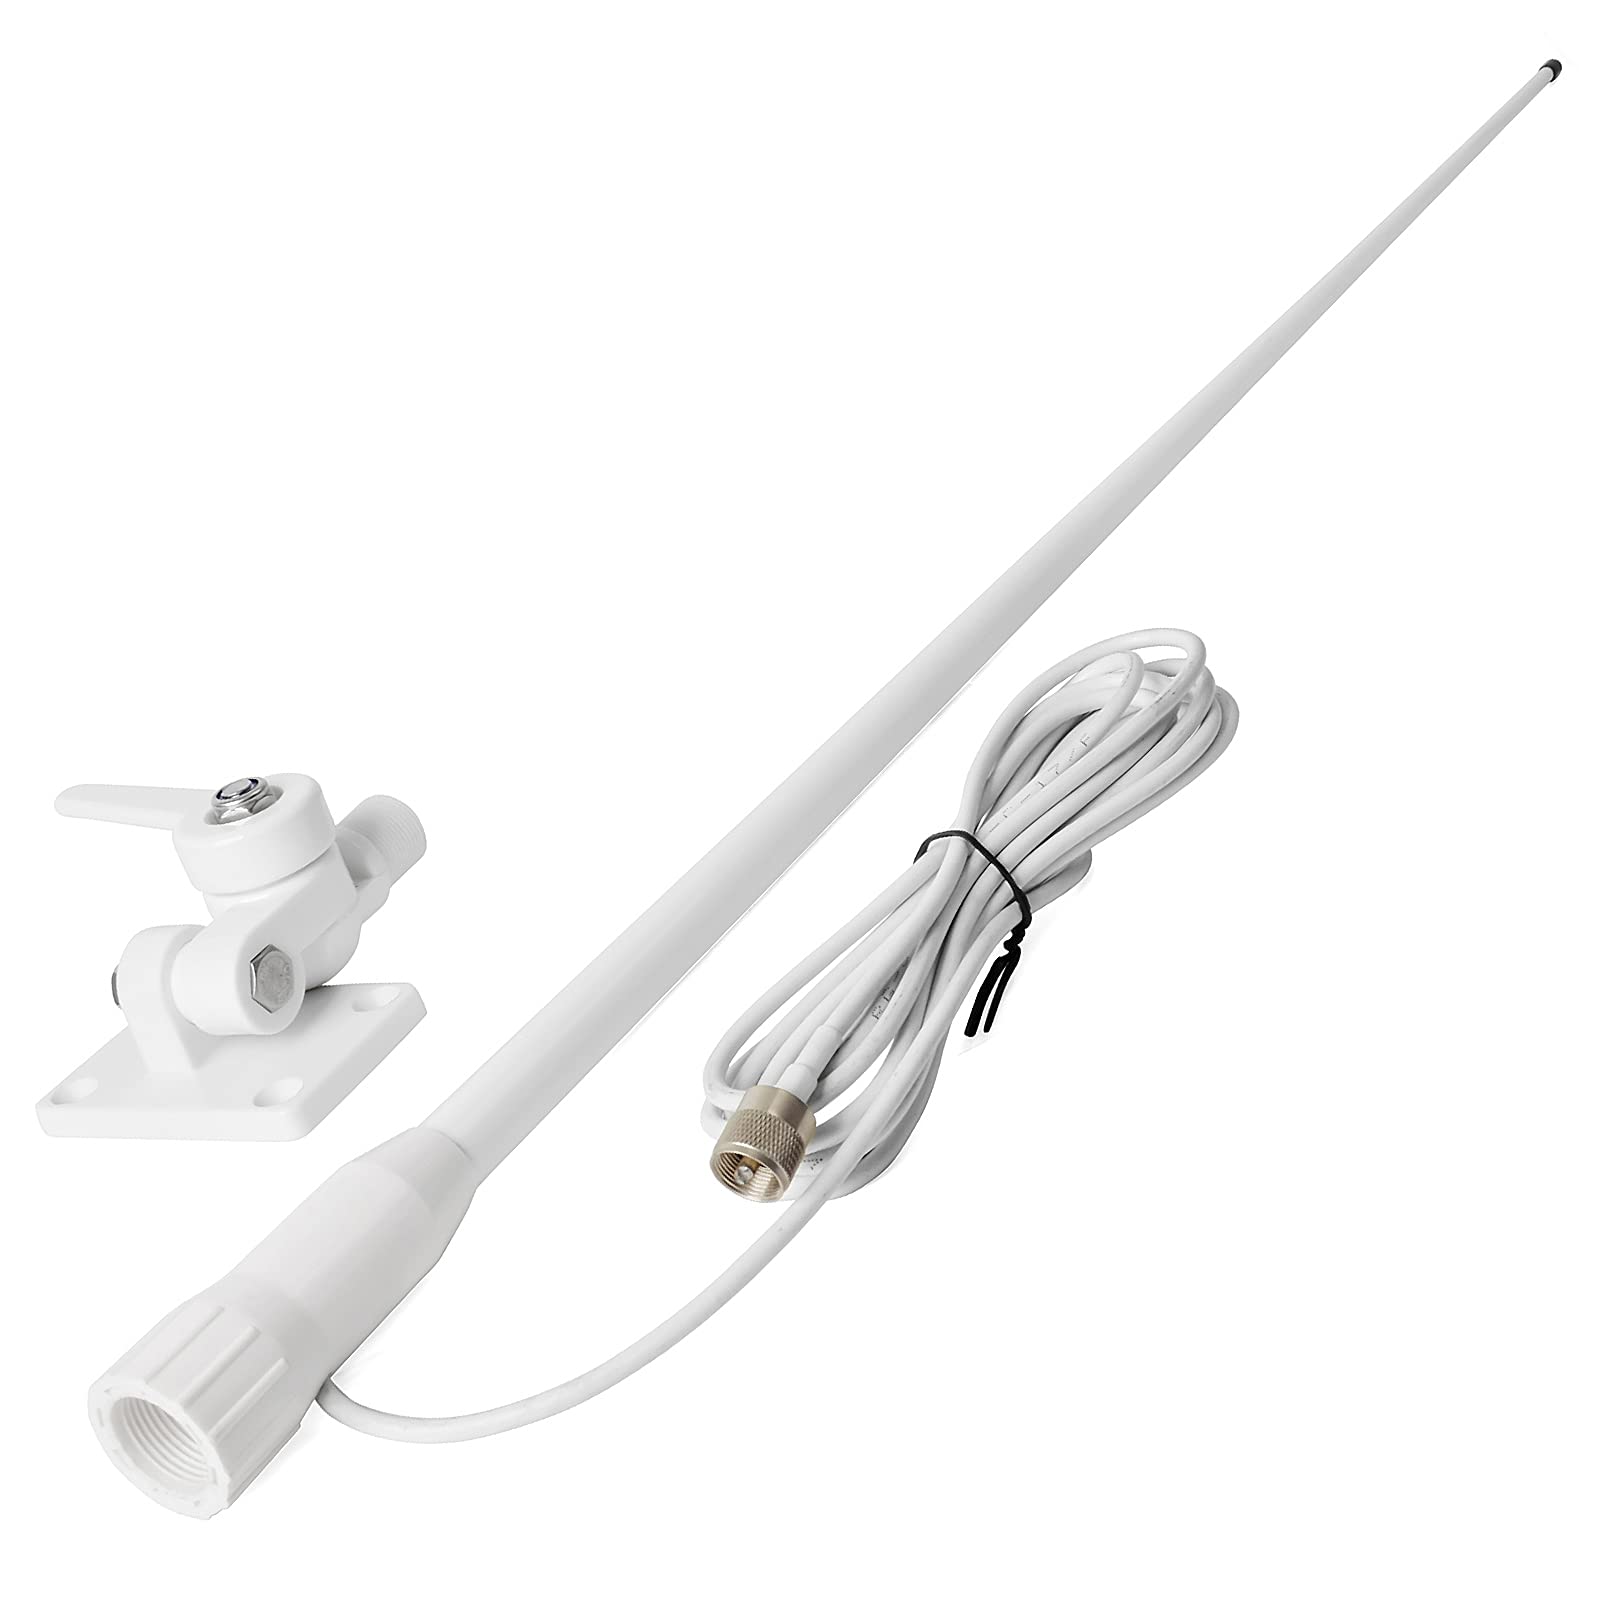 HYS VHF Marine Antenna Low-Profile 156-163Mhz Antennas W/16.4ft(5m) RG58  Low Loss Premium Coaxial Cable with PL259